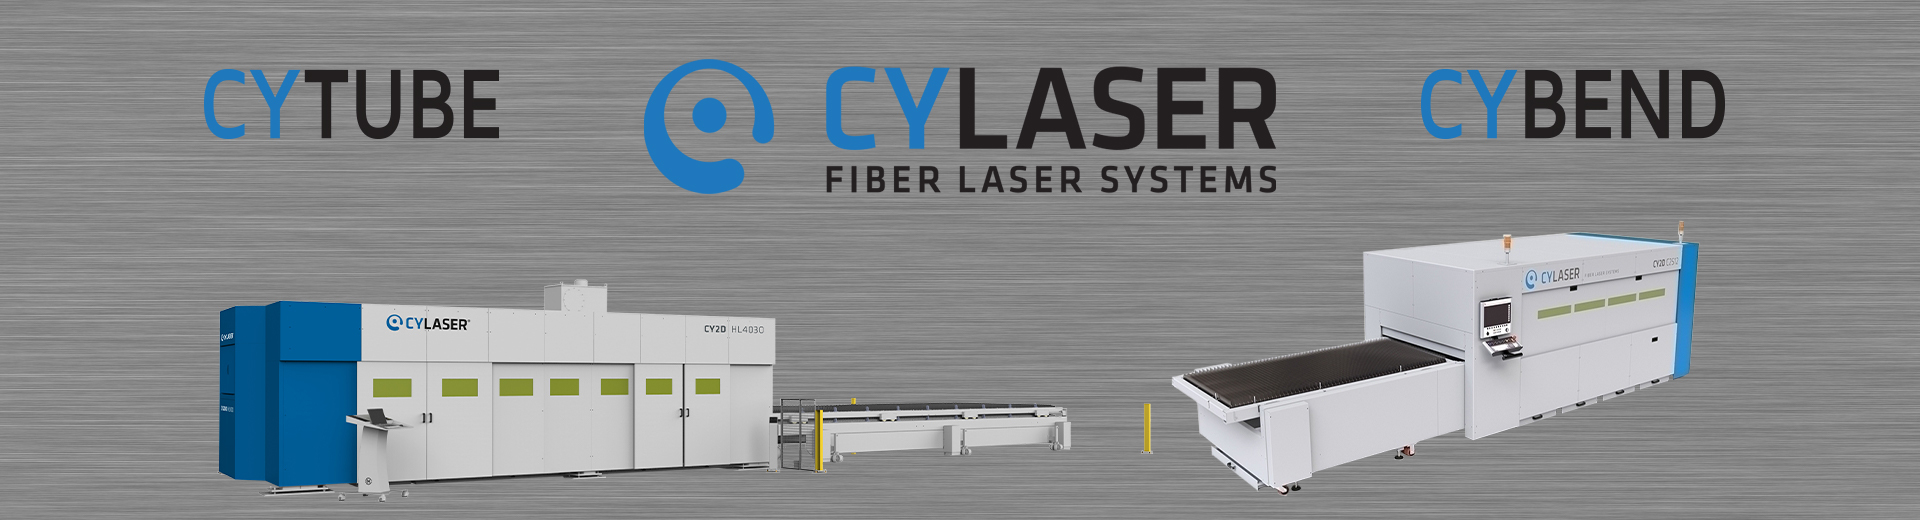 Cy Lasers Fiber Laser Systems